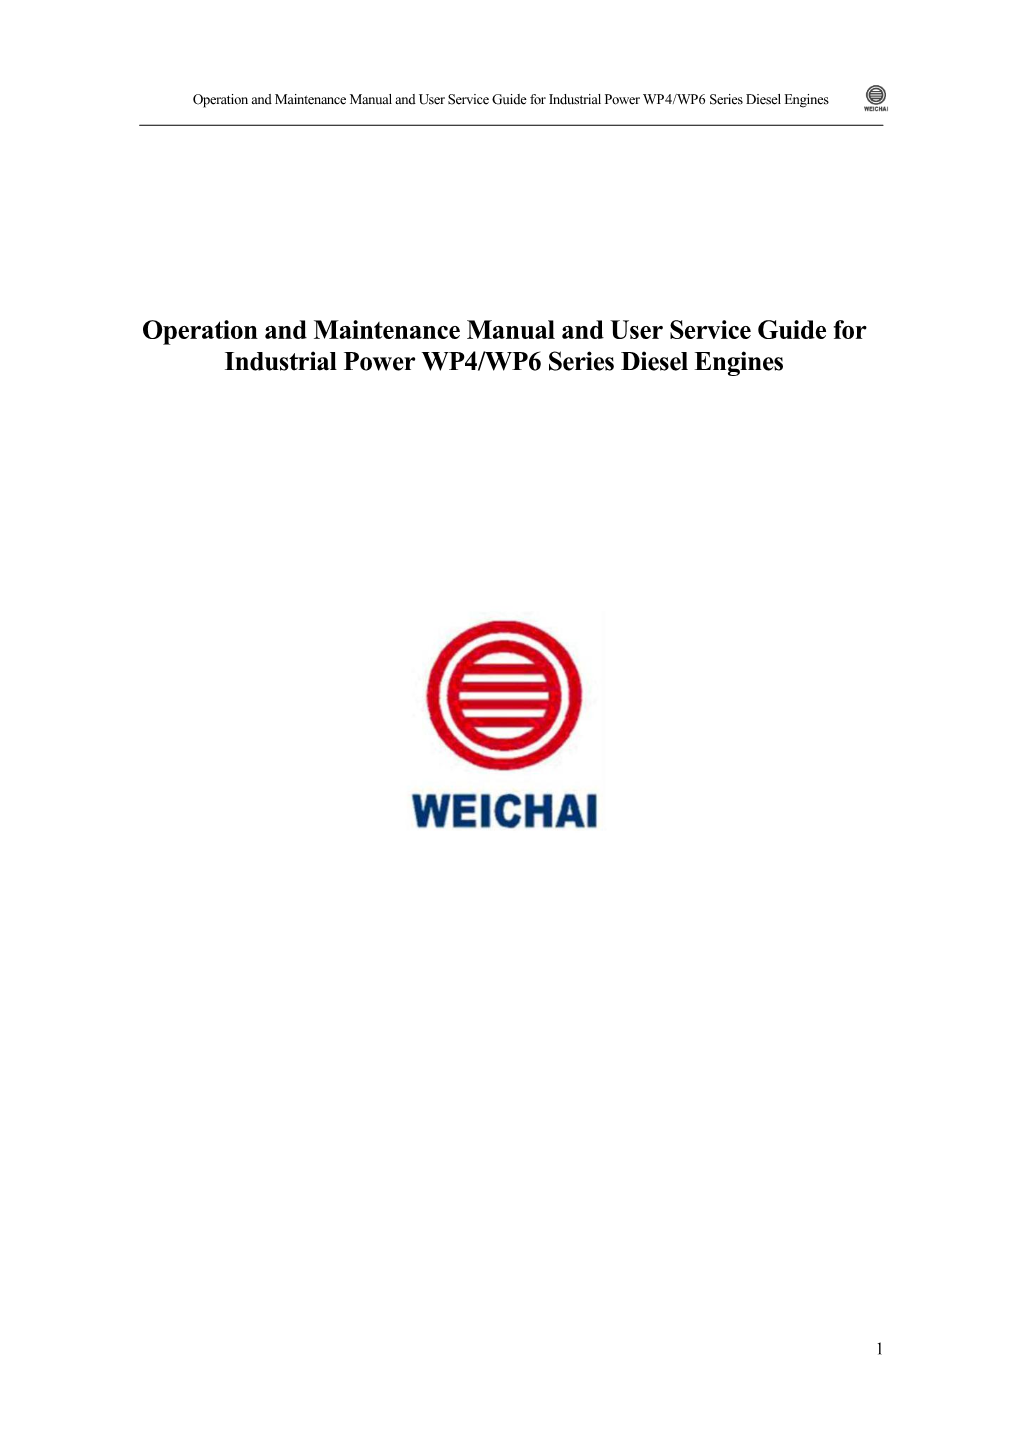 Manual and User Service Guide for Industrial Power WP4/WP6 Series Diesel Engines